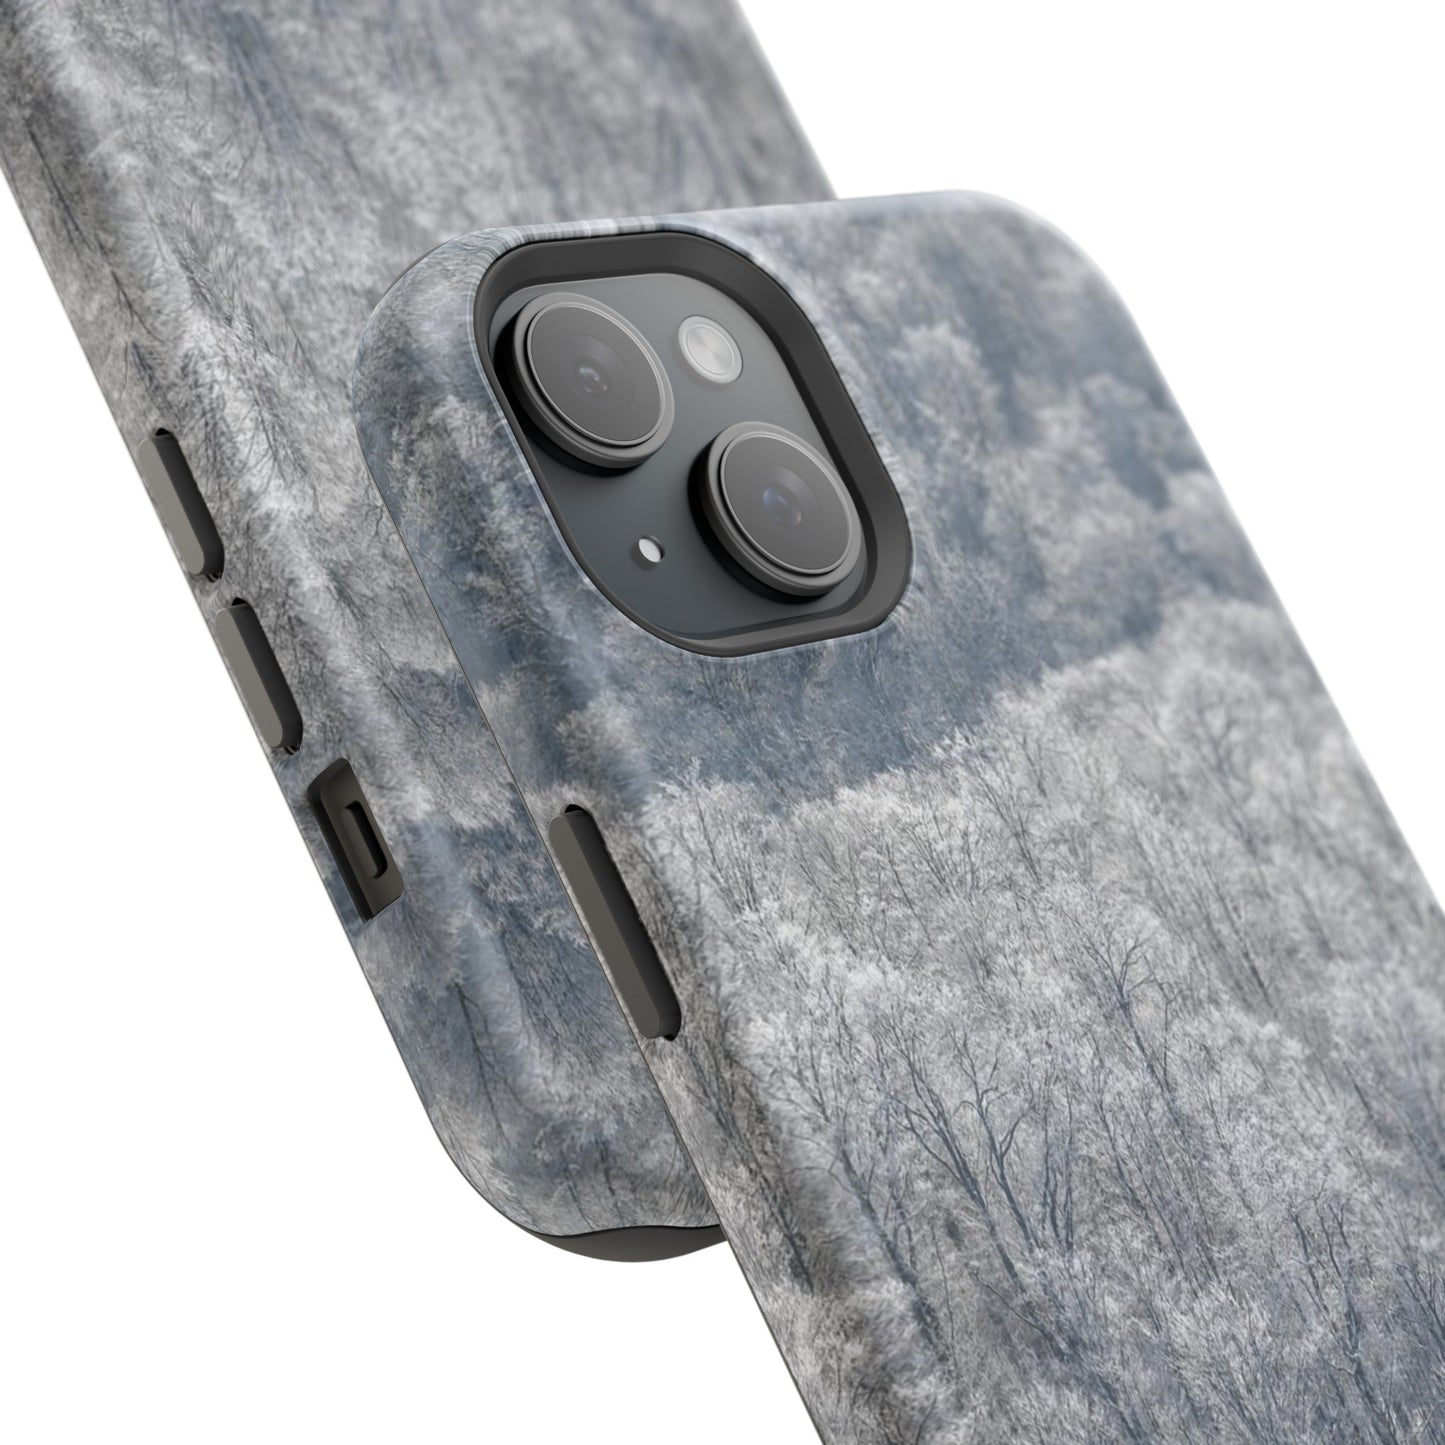 MagSafe Impact Resistant Phone Case - Frozen trees